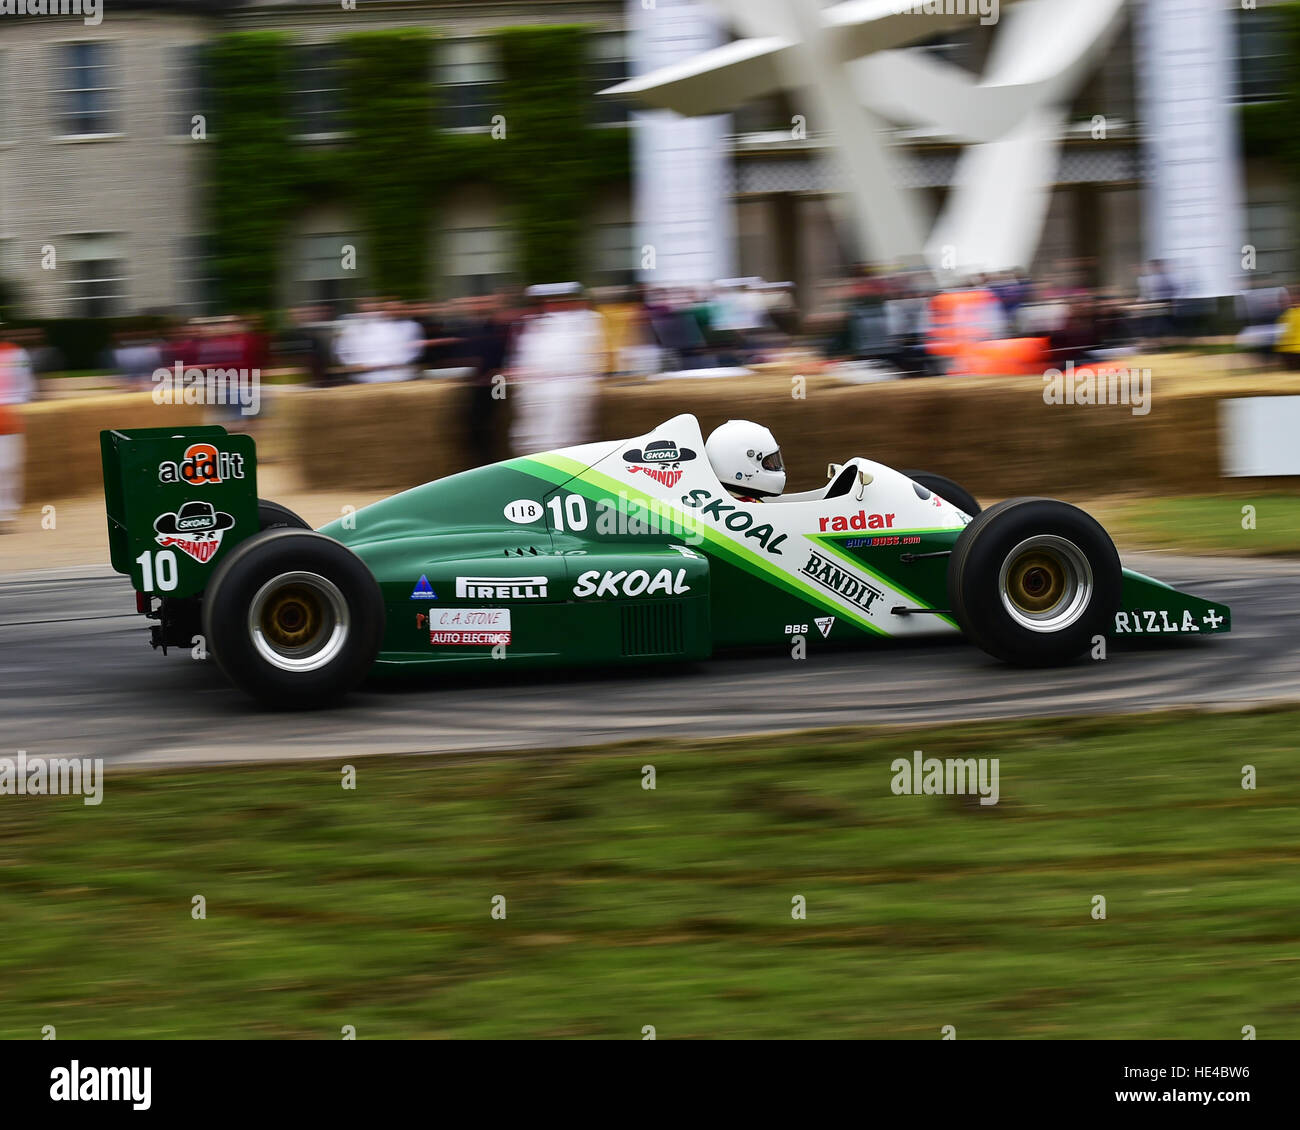 Turbo F1 Cars High Resolution Stock Photography and Images - Alamy